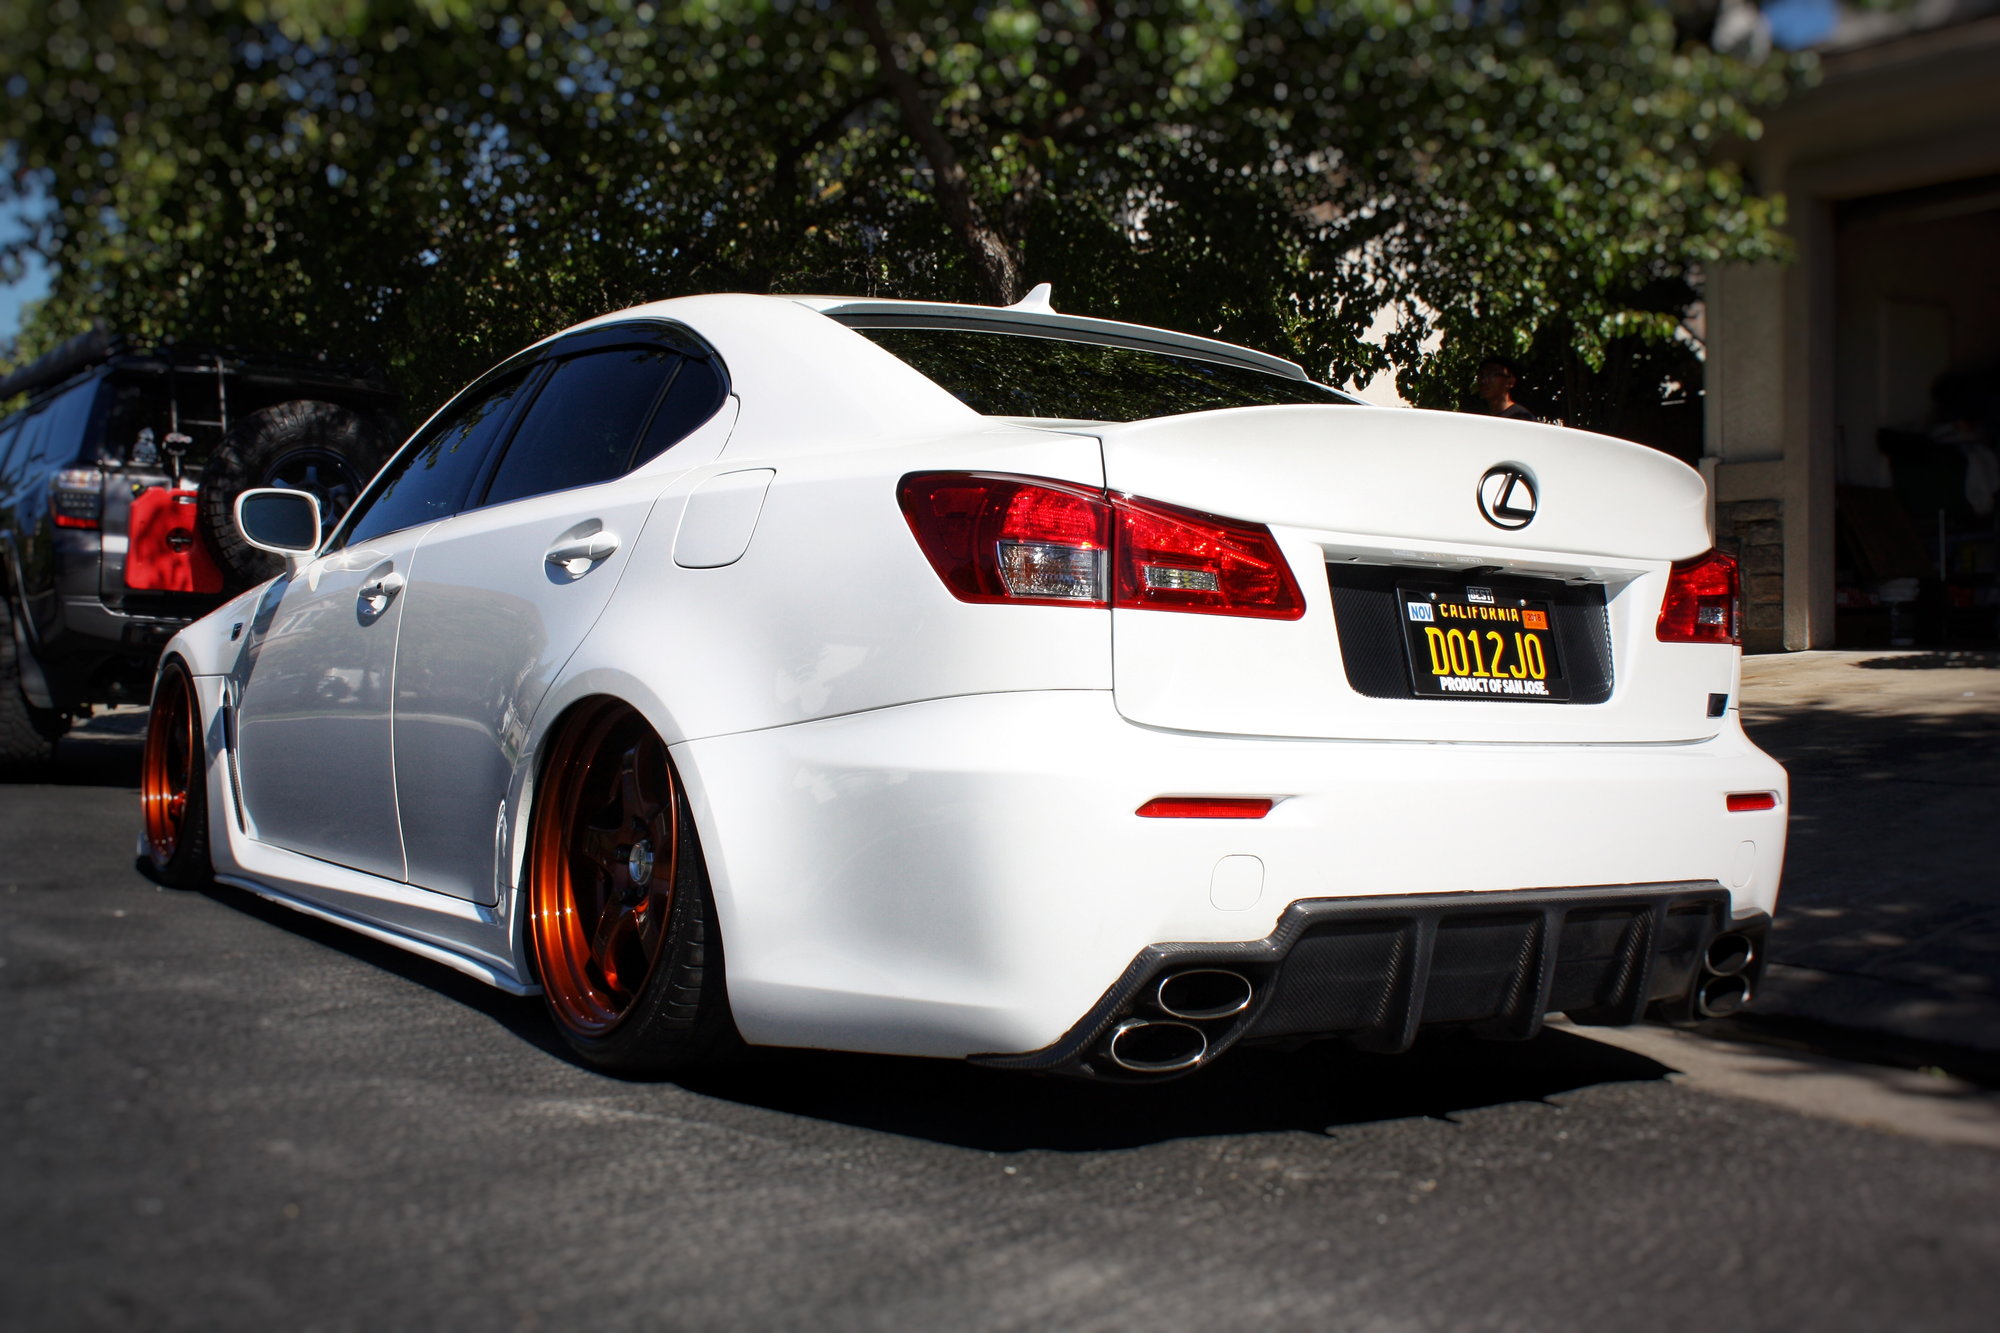 2010 Lexus IS F - 2010 Lexus IS-F Modded, NorCal. - Used - VIN JTHBP5C20A5006981 - 69,100 Miles - 8 cyl - 2WD - Automatic - Sedan - White - Stockton, CA 95219, United States